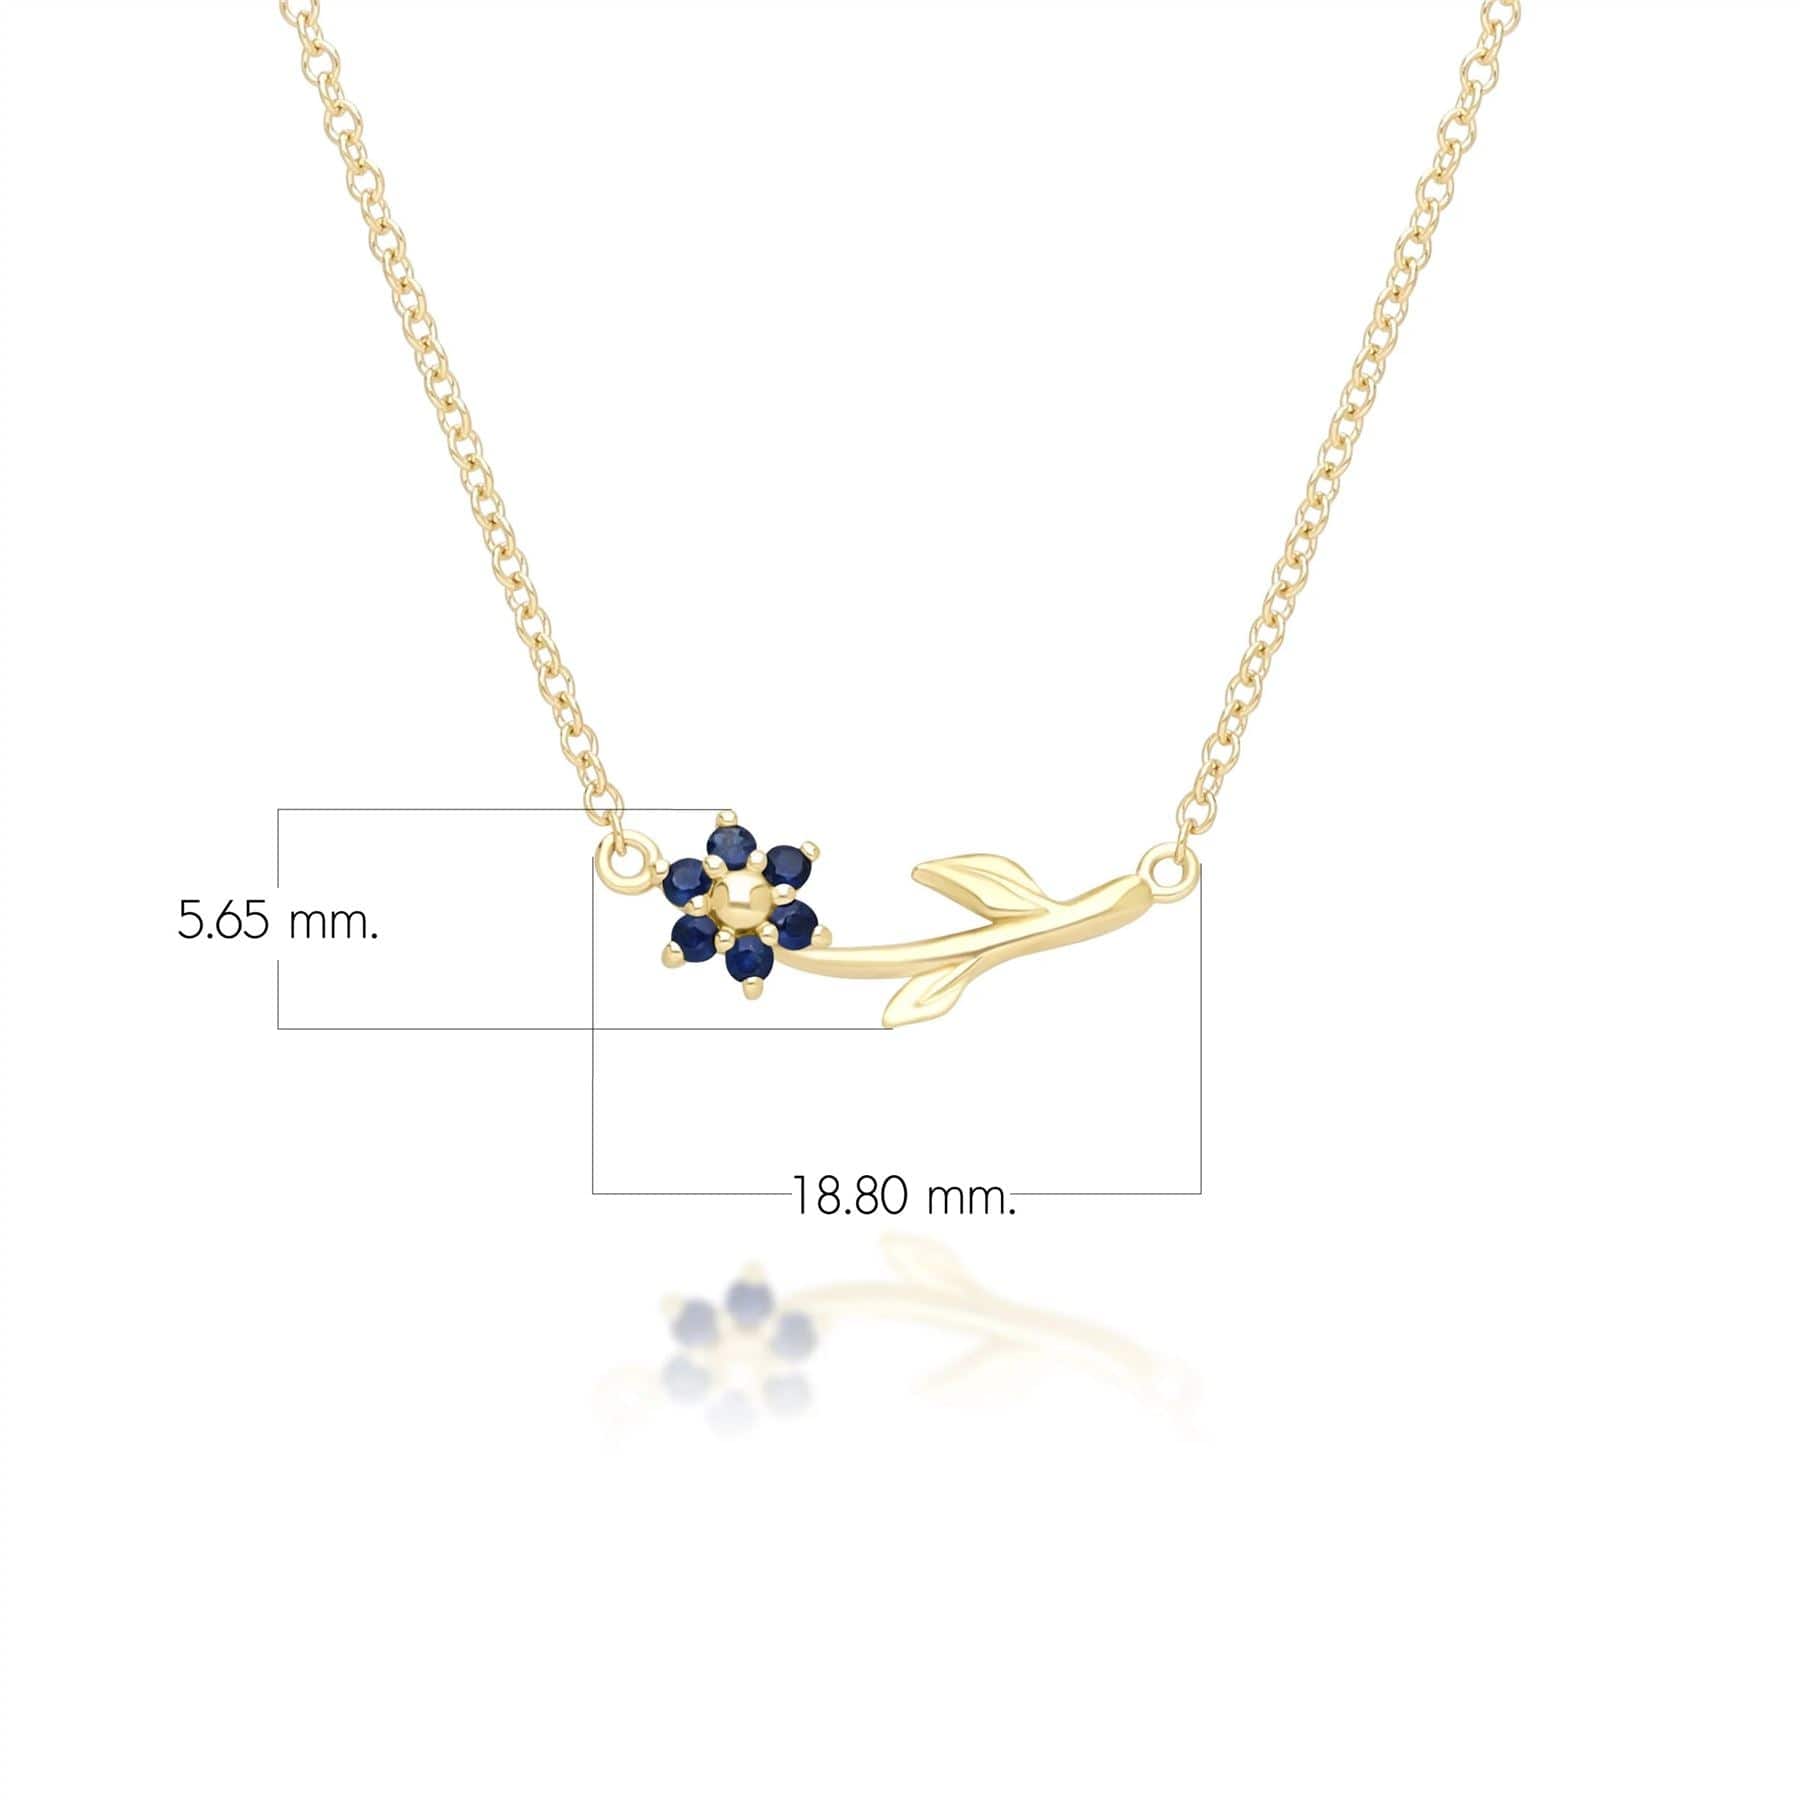 Floral Vine Sapphire Necklace in 9ct Yellow Gold